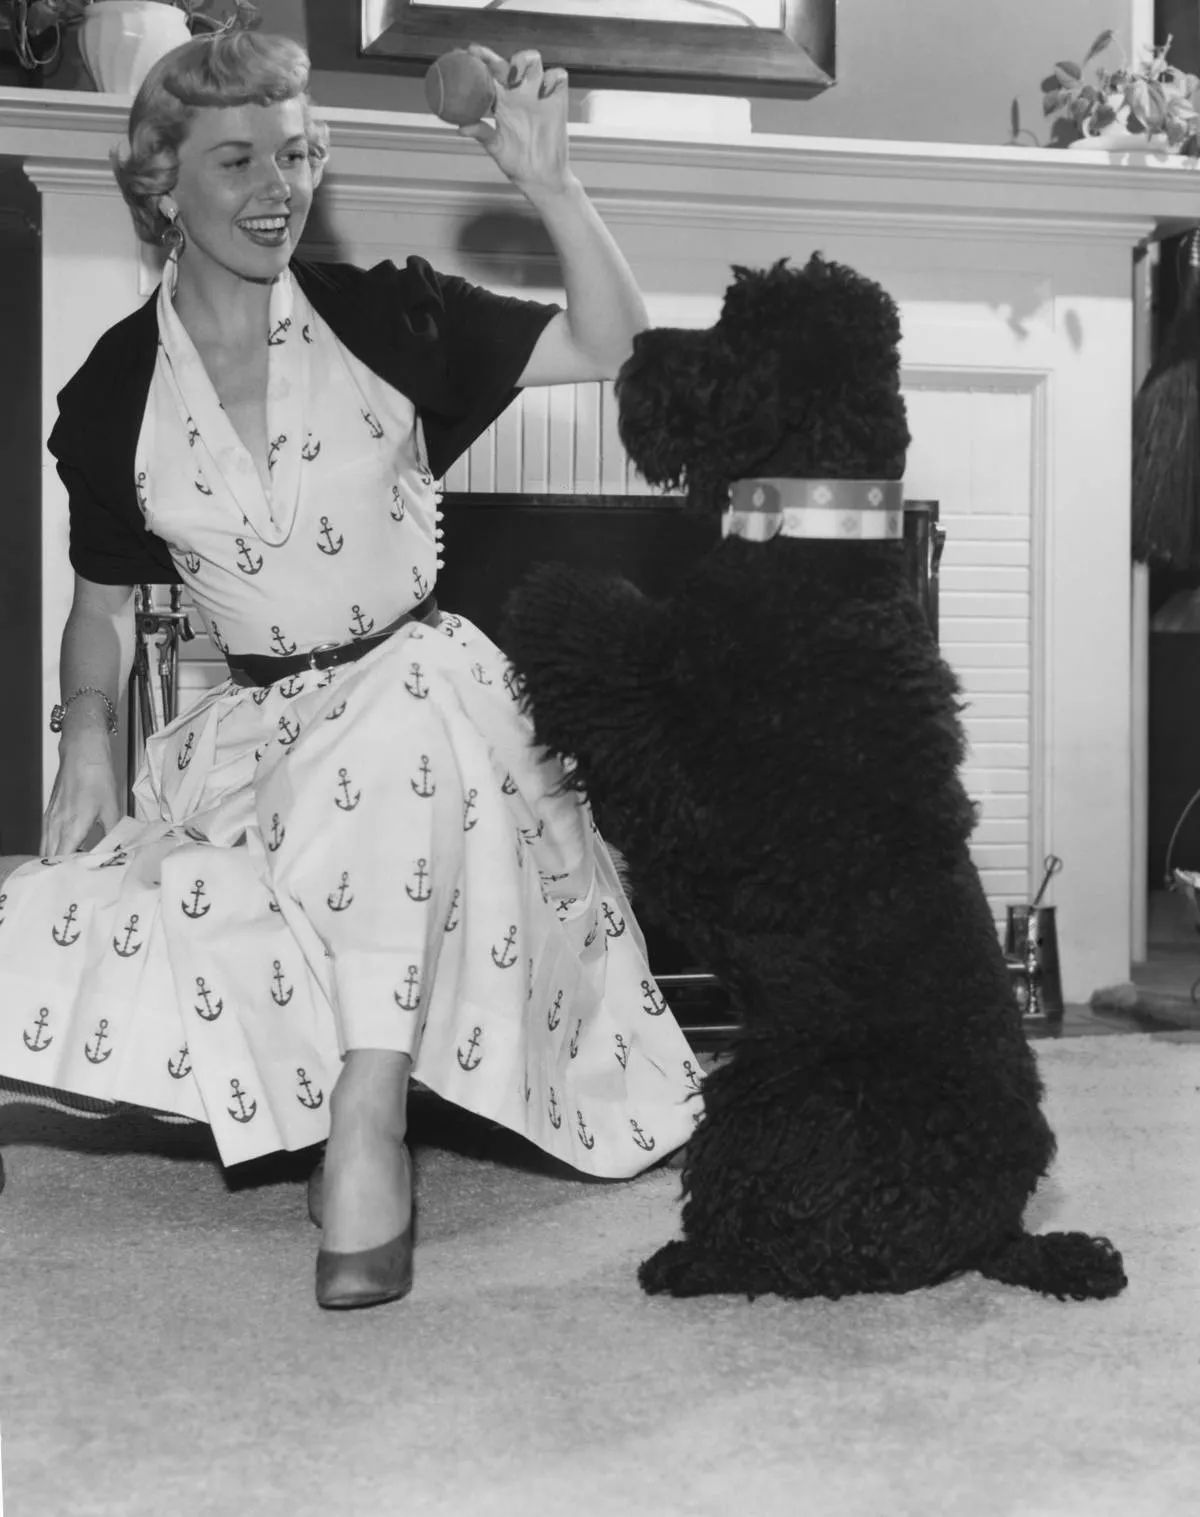 Doris Day plays fetch with a poodle.